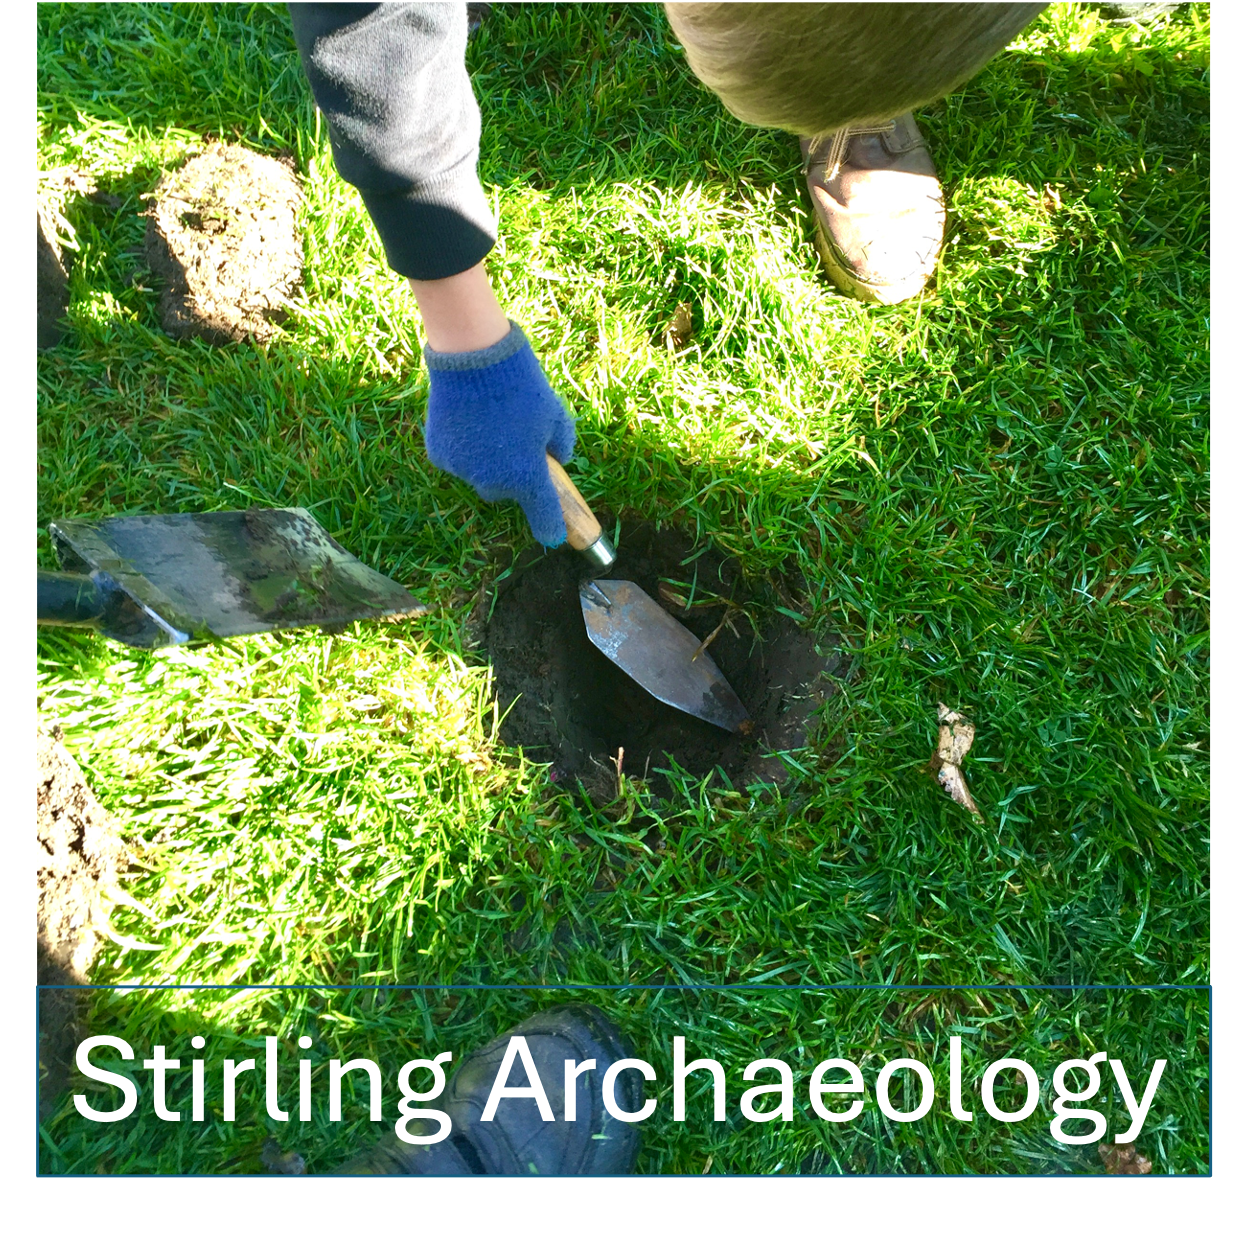 Stirling Archaeology